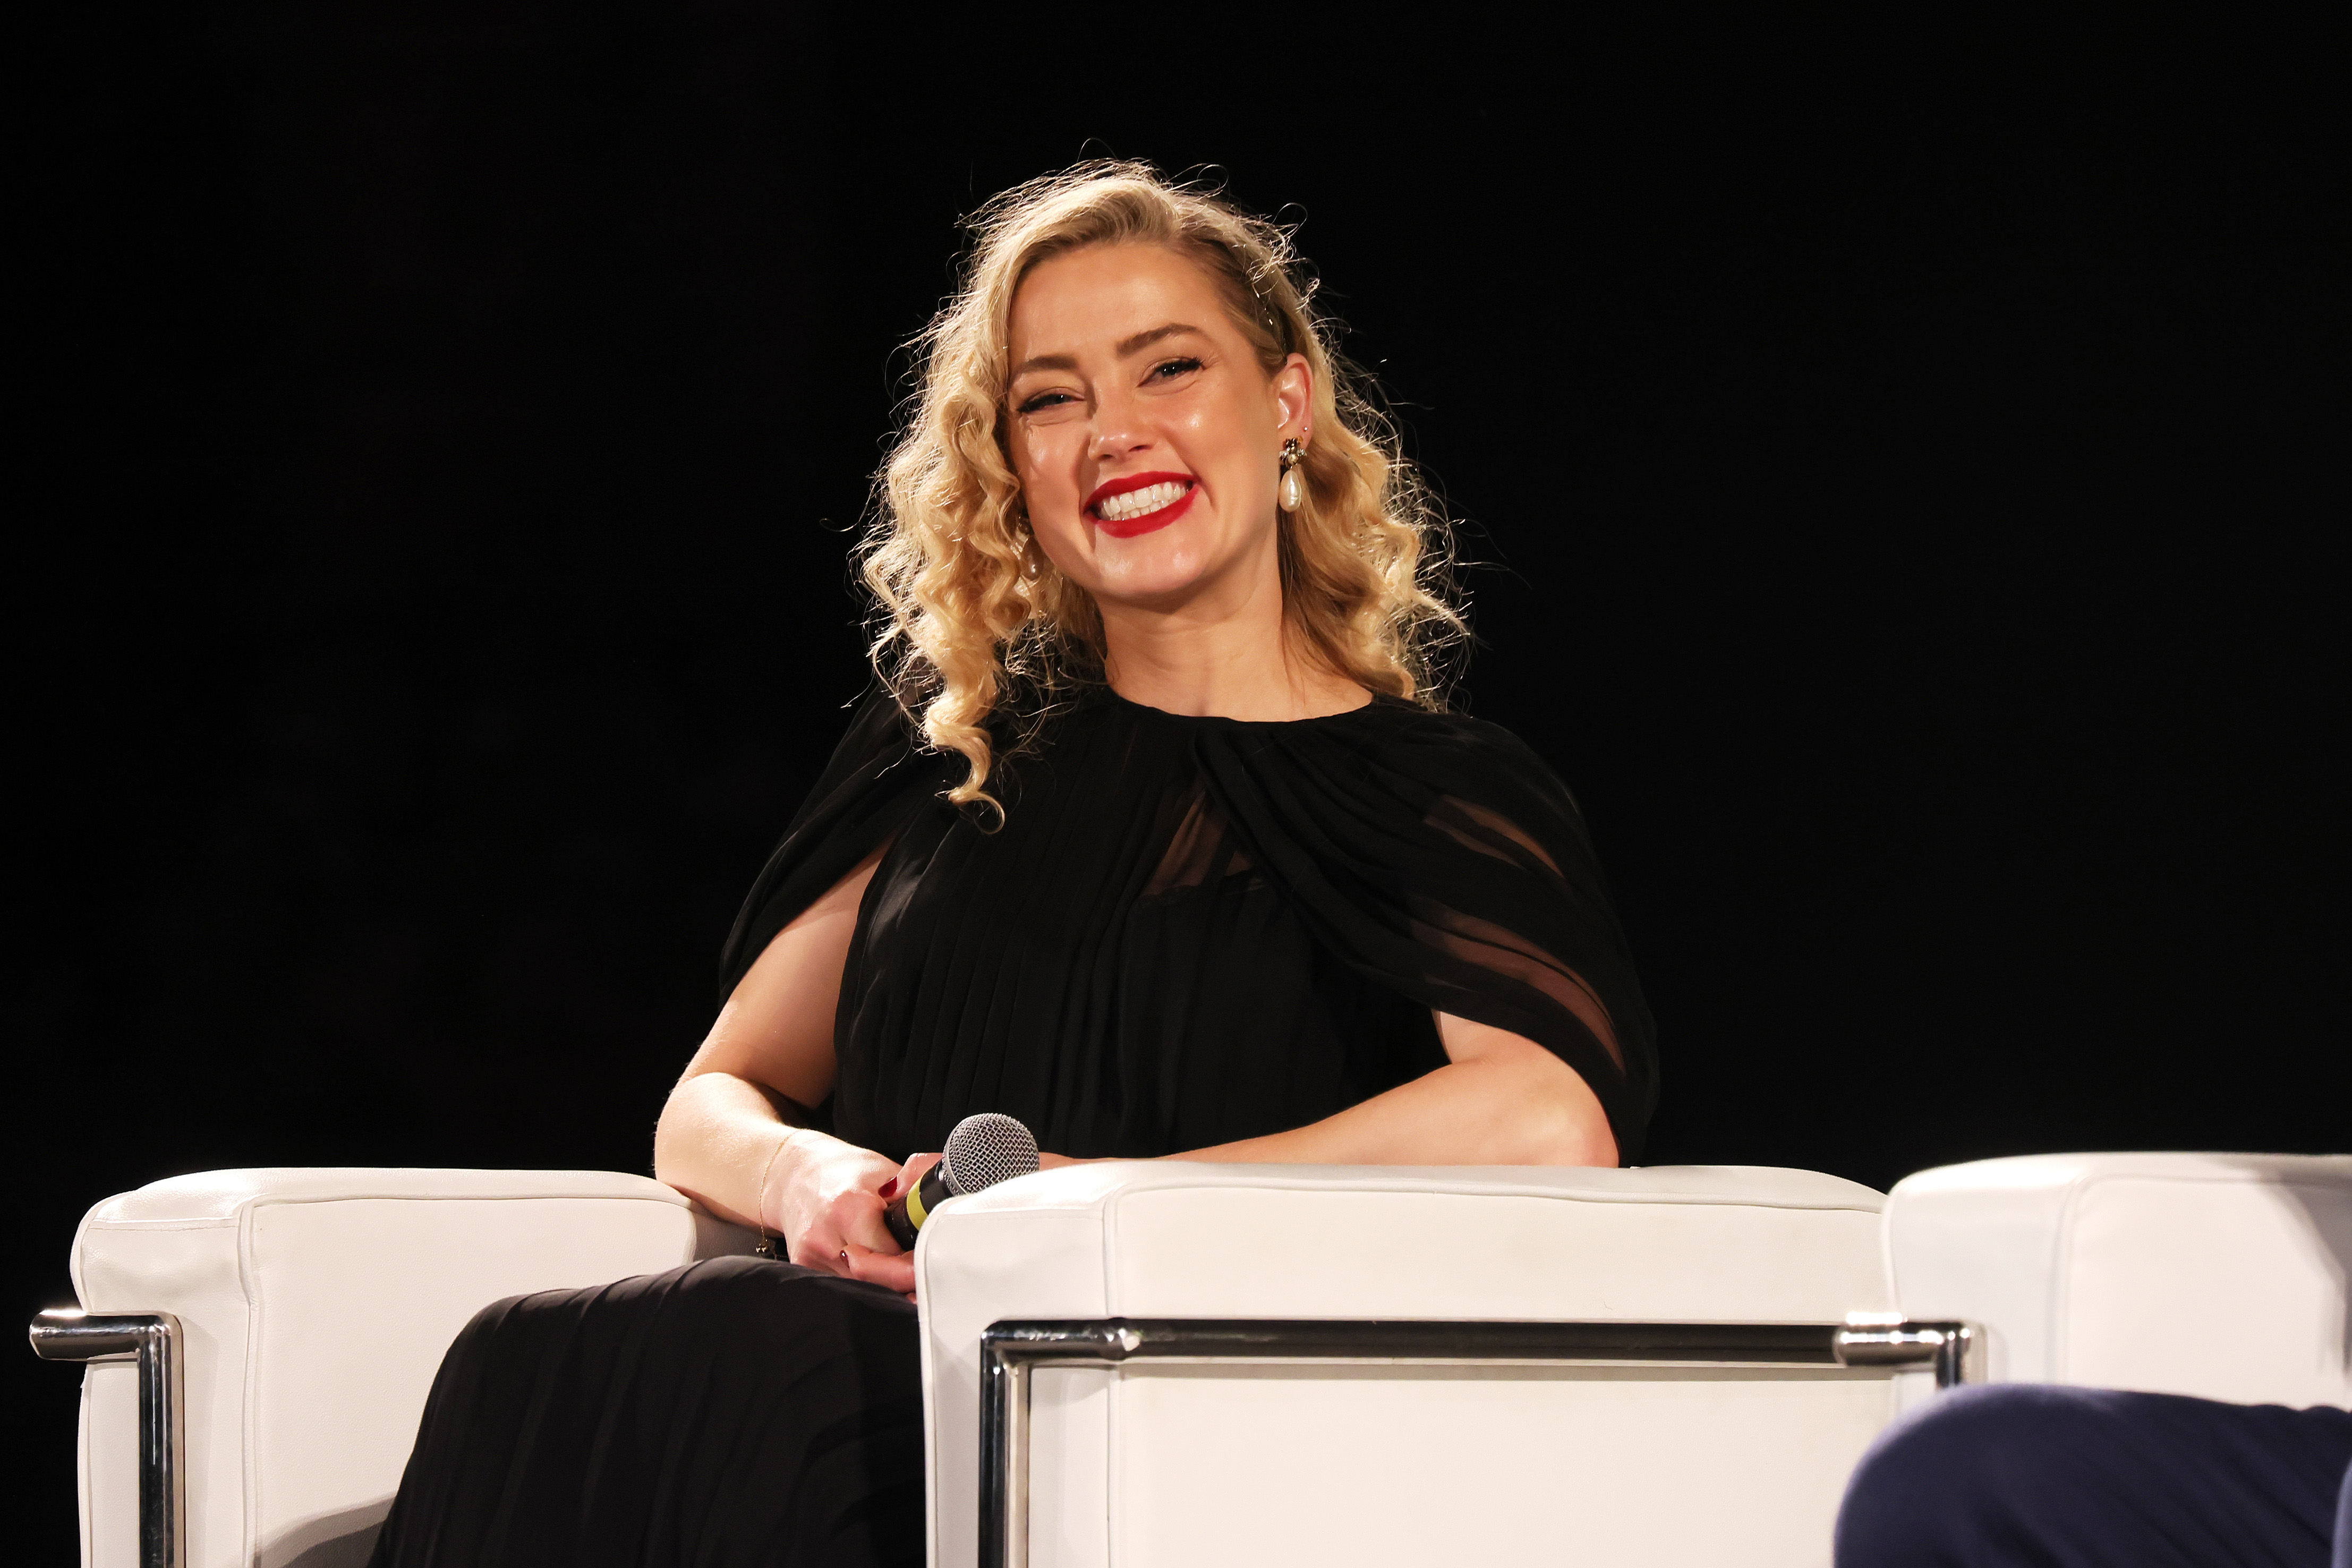 Actress Amber Heard speaks on stage during the 69th Taormina Film Festival on June 24, 2023 in Taormina, Italy | Source: Getty Images